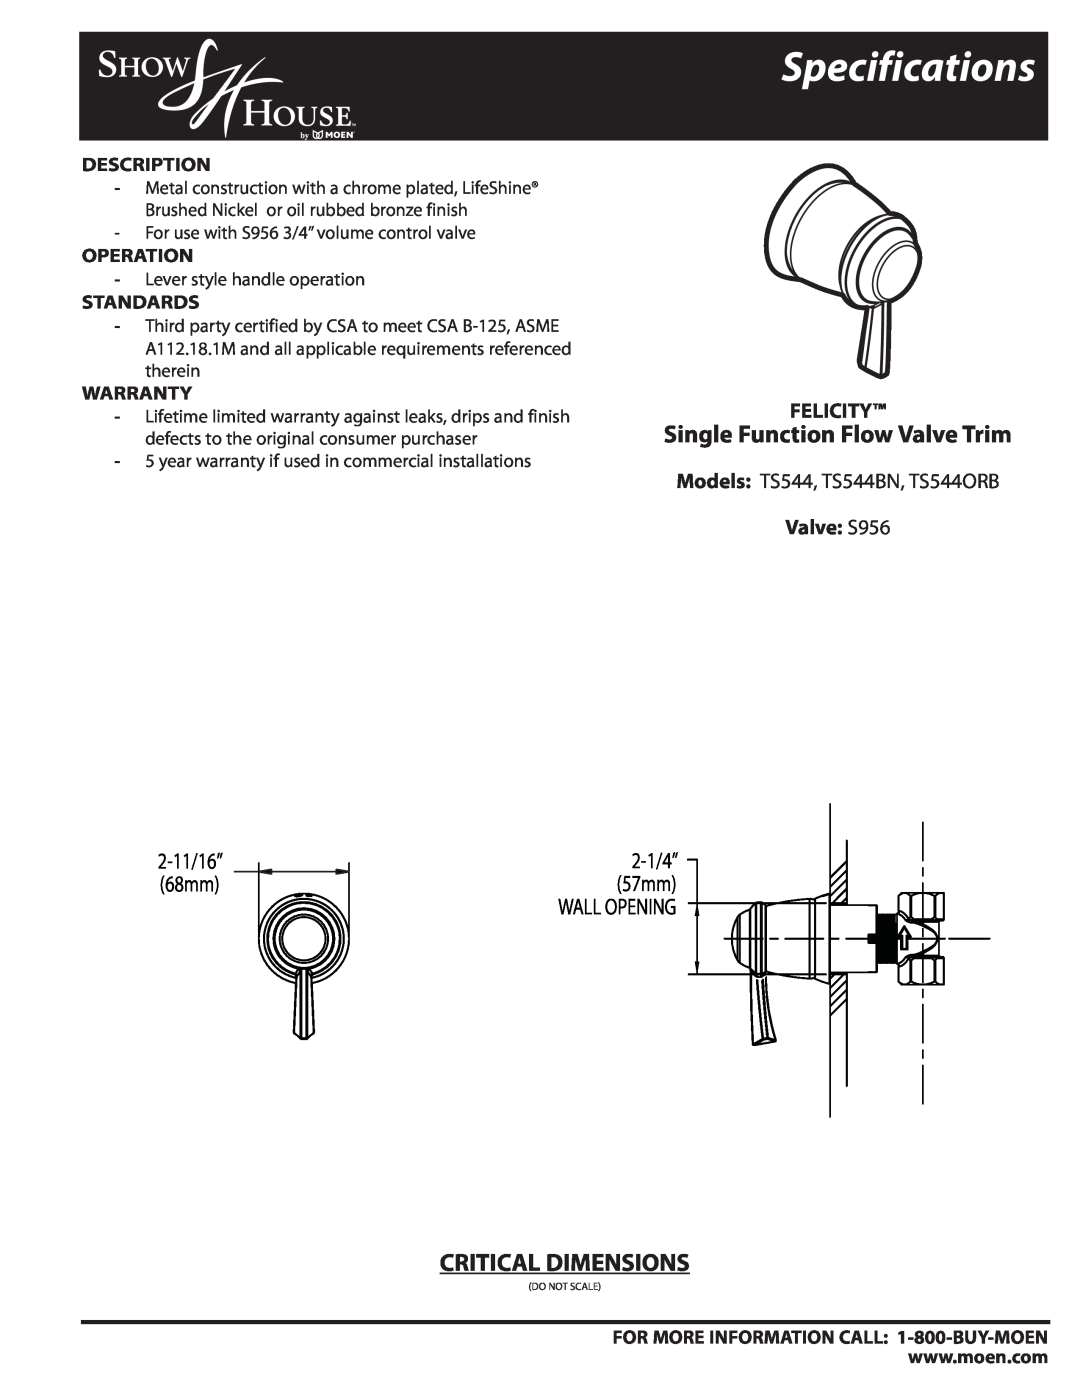 Moen TS544BN specifications Specifications, Single Function Flow Valve Trim, Critical Dimensions, Wall Opening, Felicity 